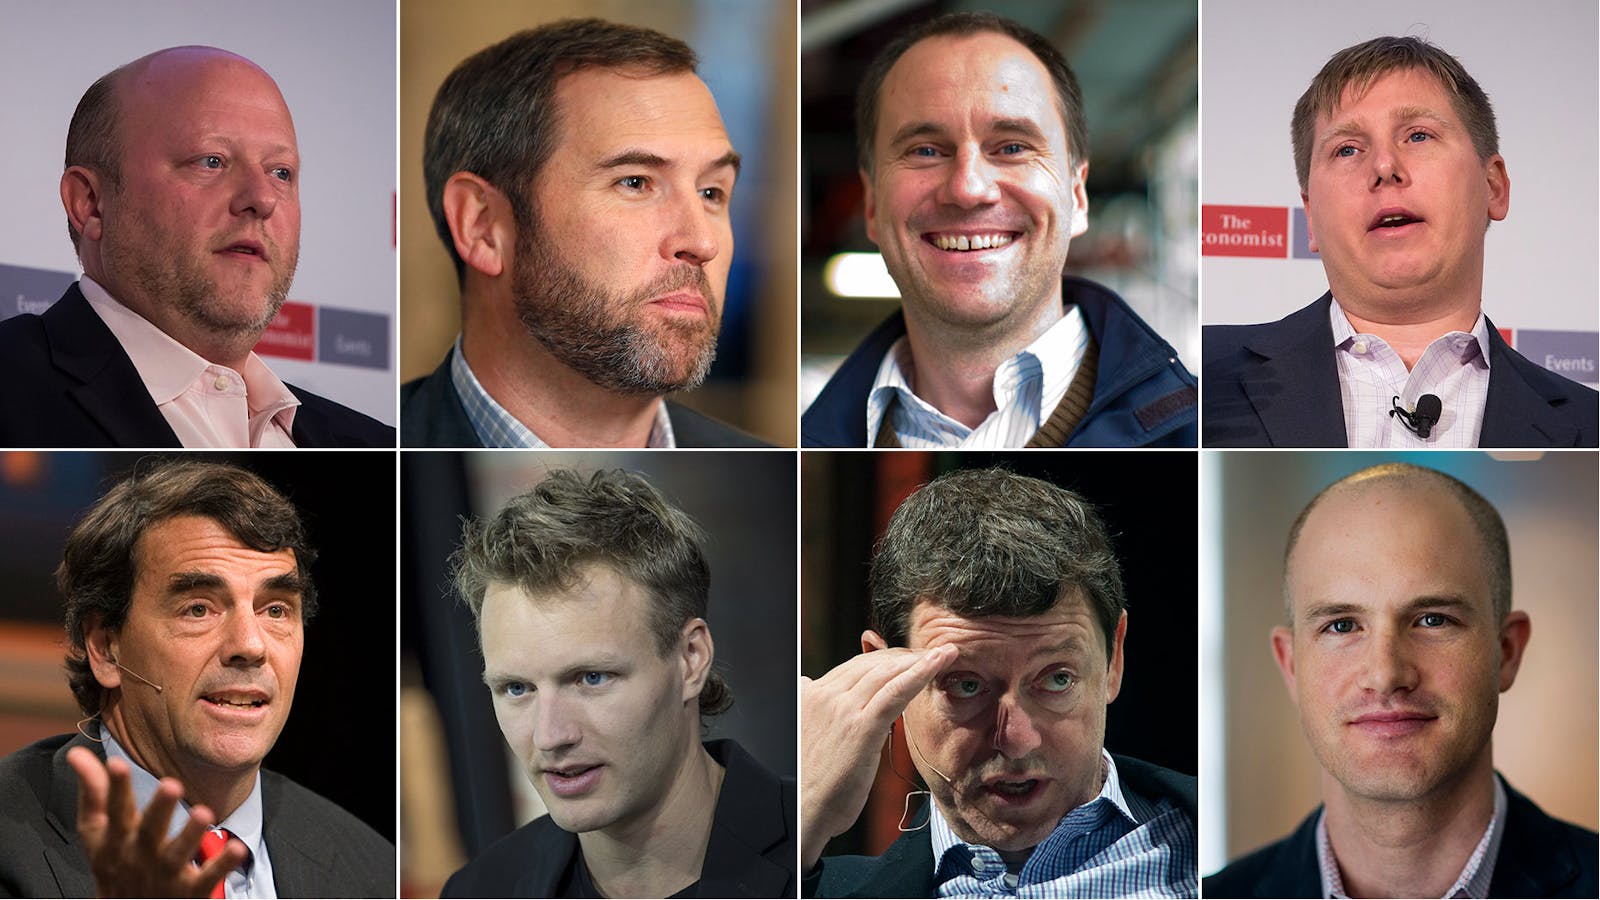 Caption: Clockwise from top left: Jeremy Allaire, Brad Garlinghouse, Albert Wenger, Barry Silbert, Brian Armstrong, Fred Wilson,  Olaf Carson-Wee, Tim Draper